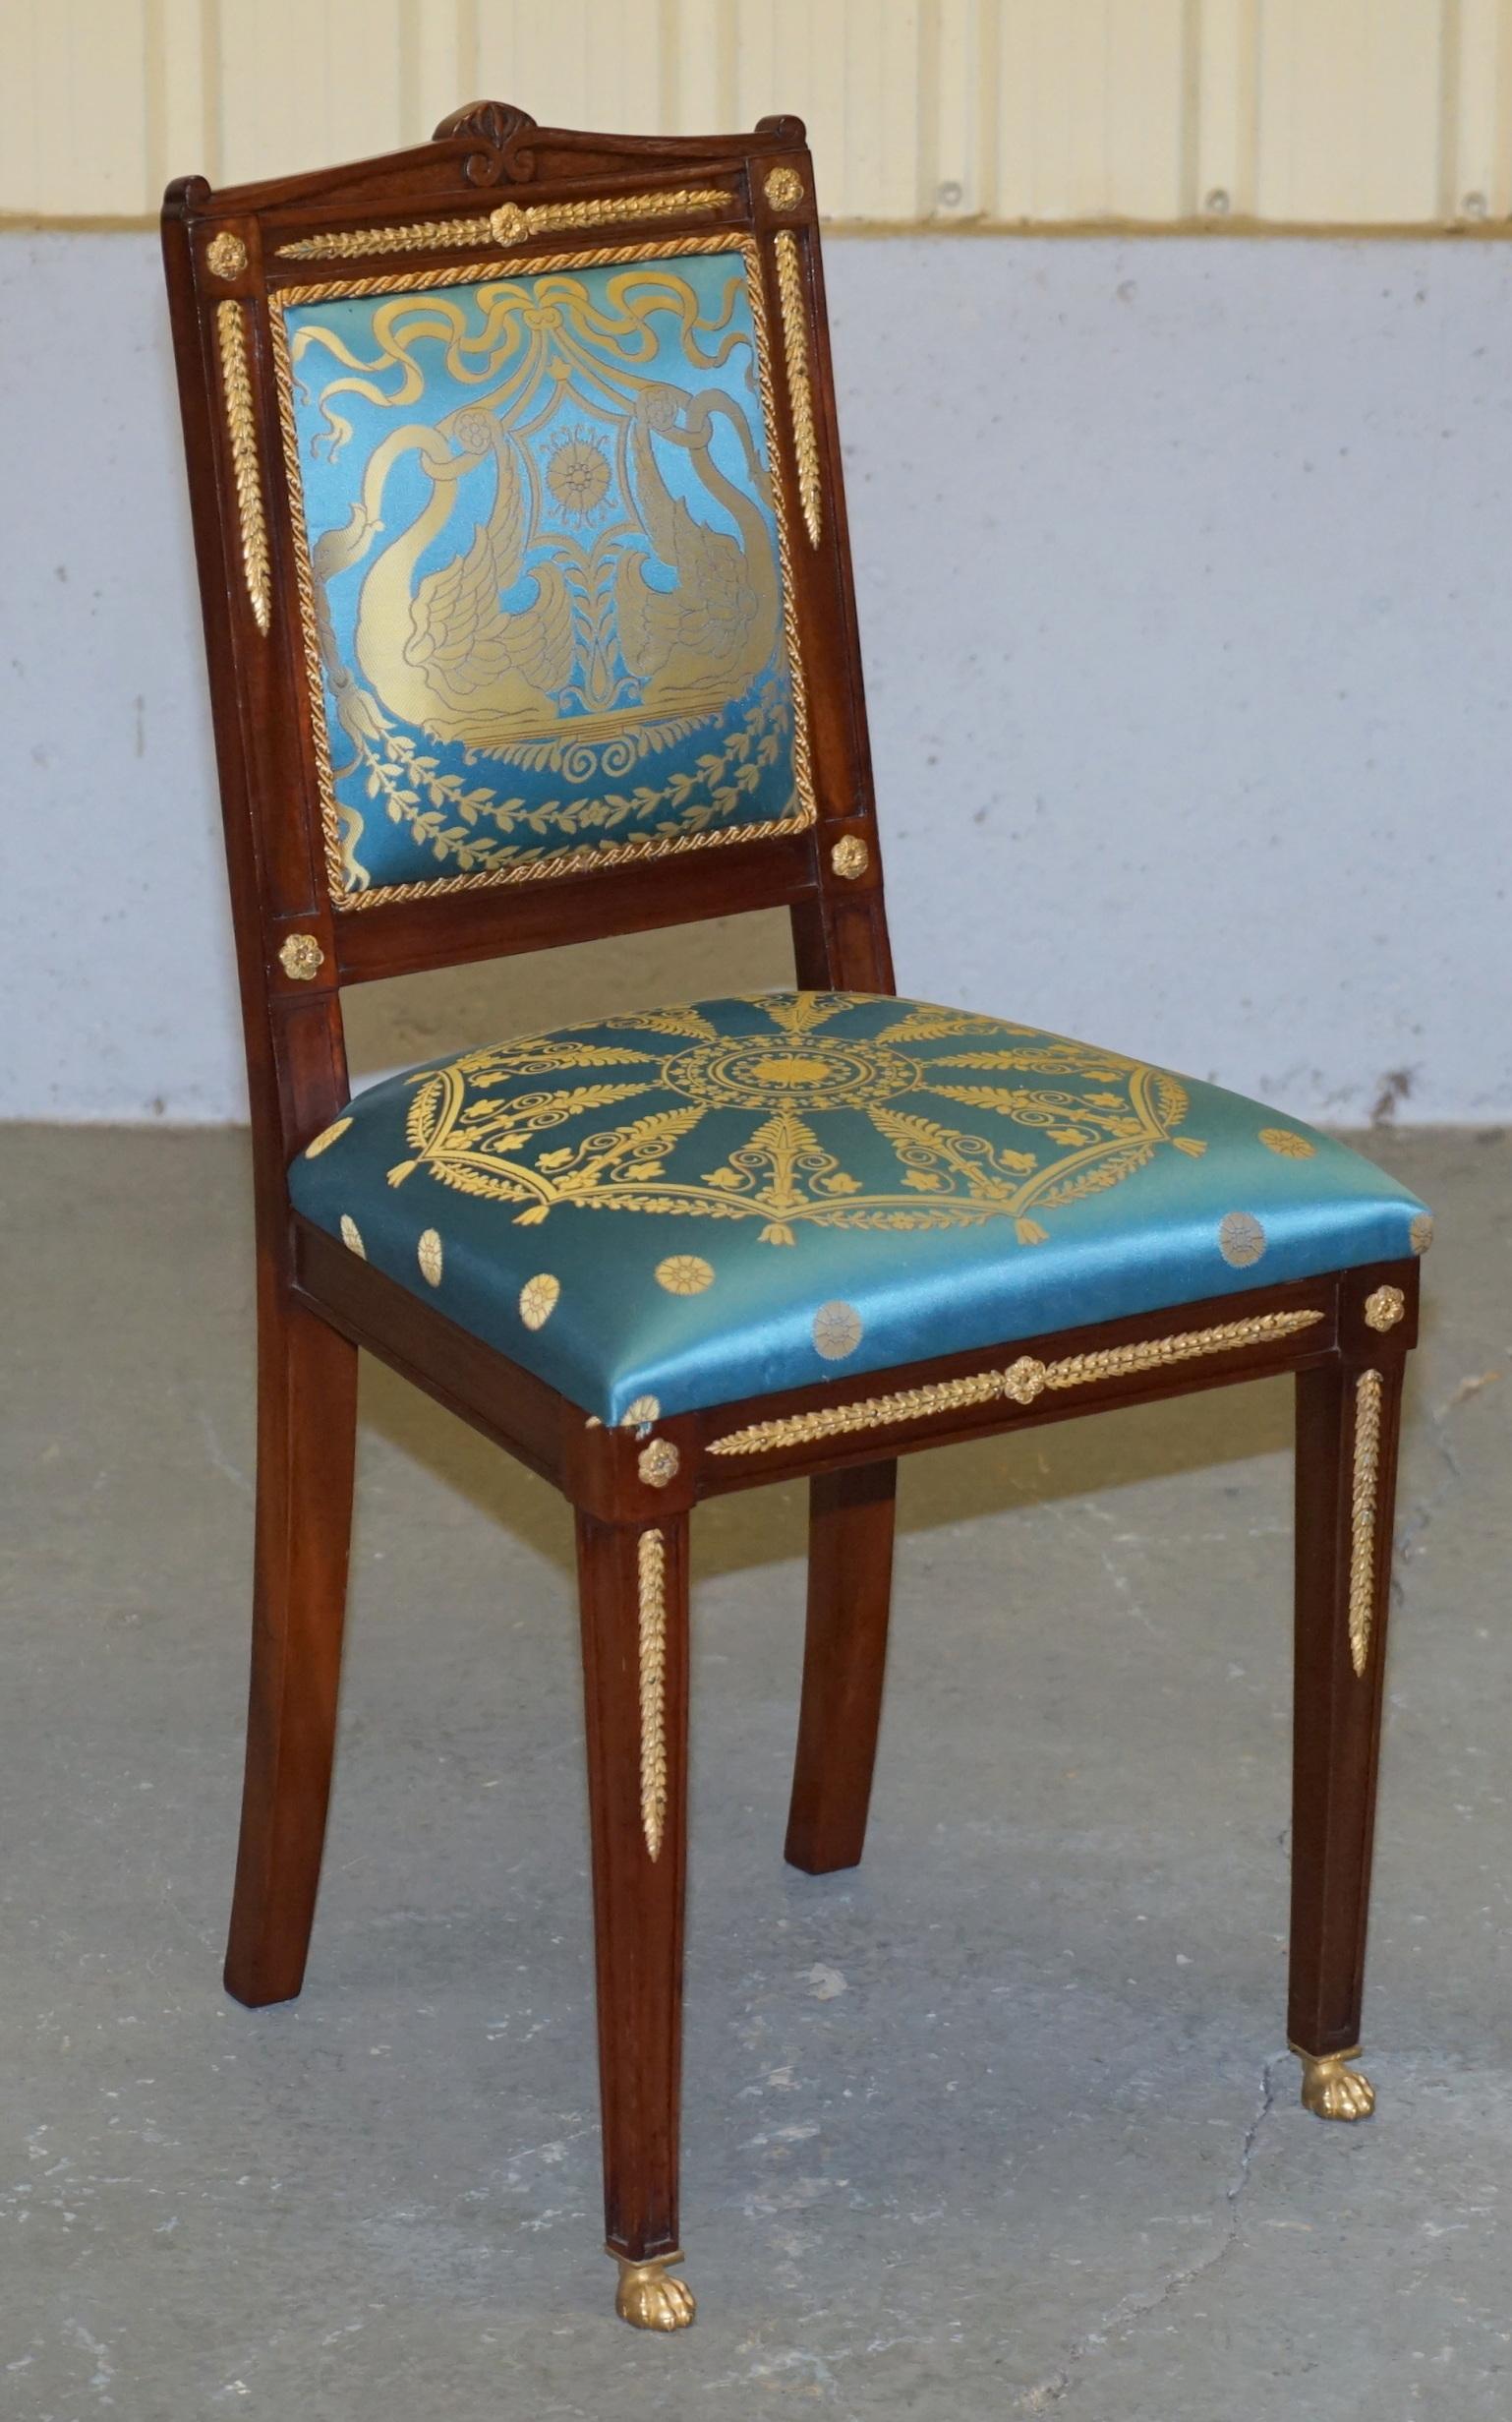 We are delighted to offer for sale this very fine suite of eight mahogany, gilt bronze and silk upholstered dining chairs in the French Napoleon III Empire style

The chairs are exceptional quality, circa 1900, the frames are all light mahogany,